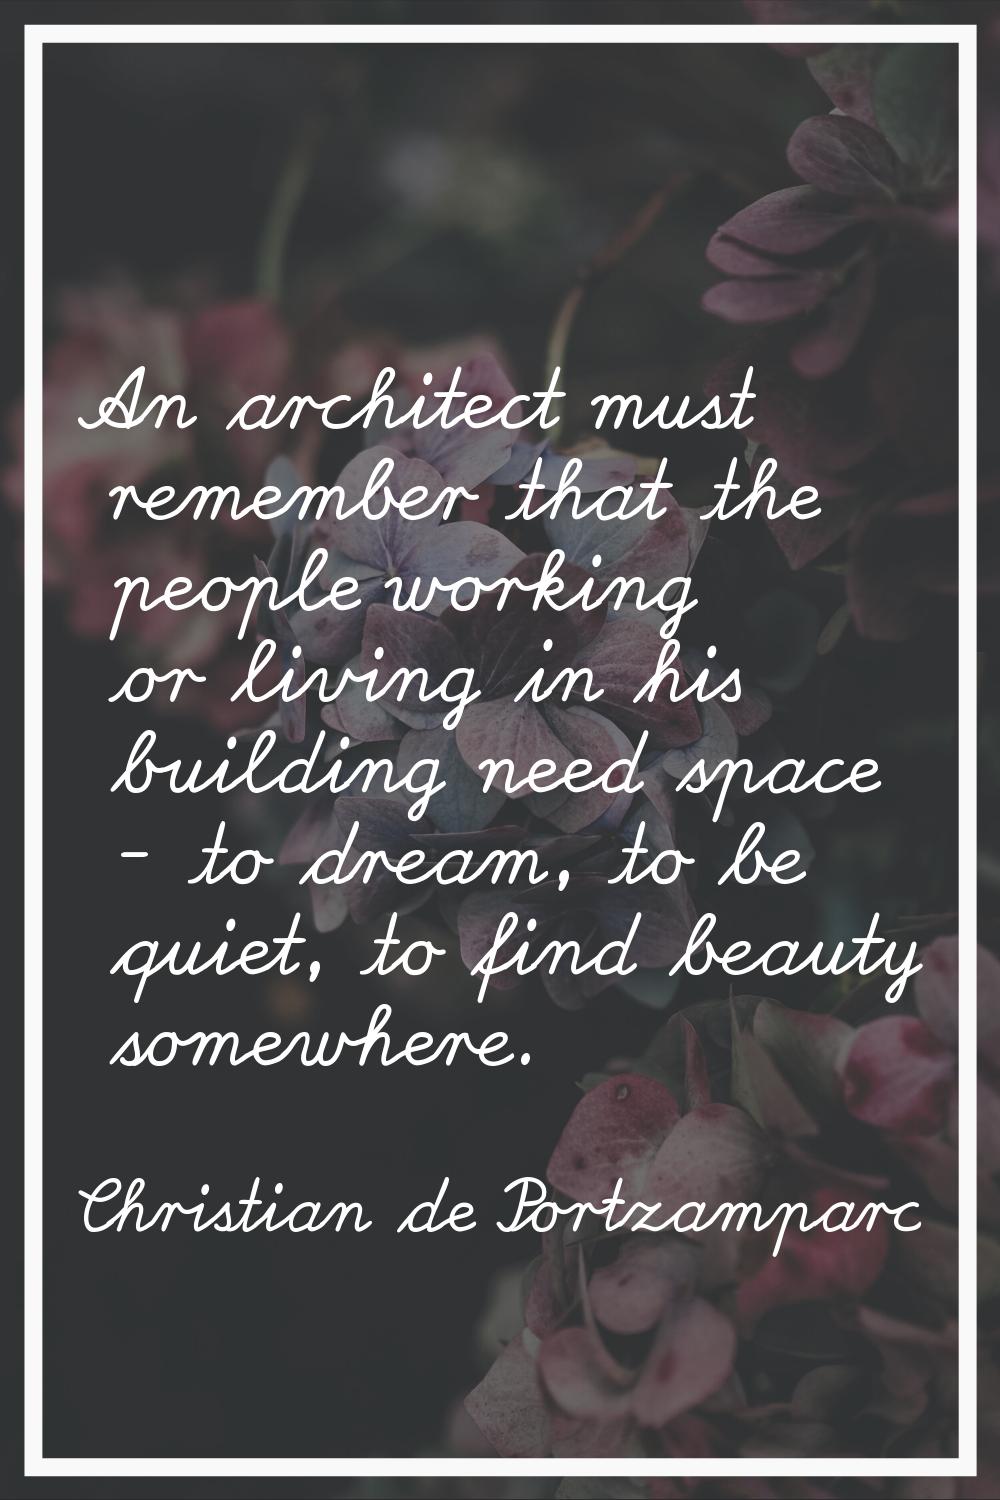 An architect must remember that the people working or living in his building need space - to dream,